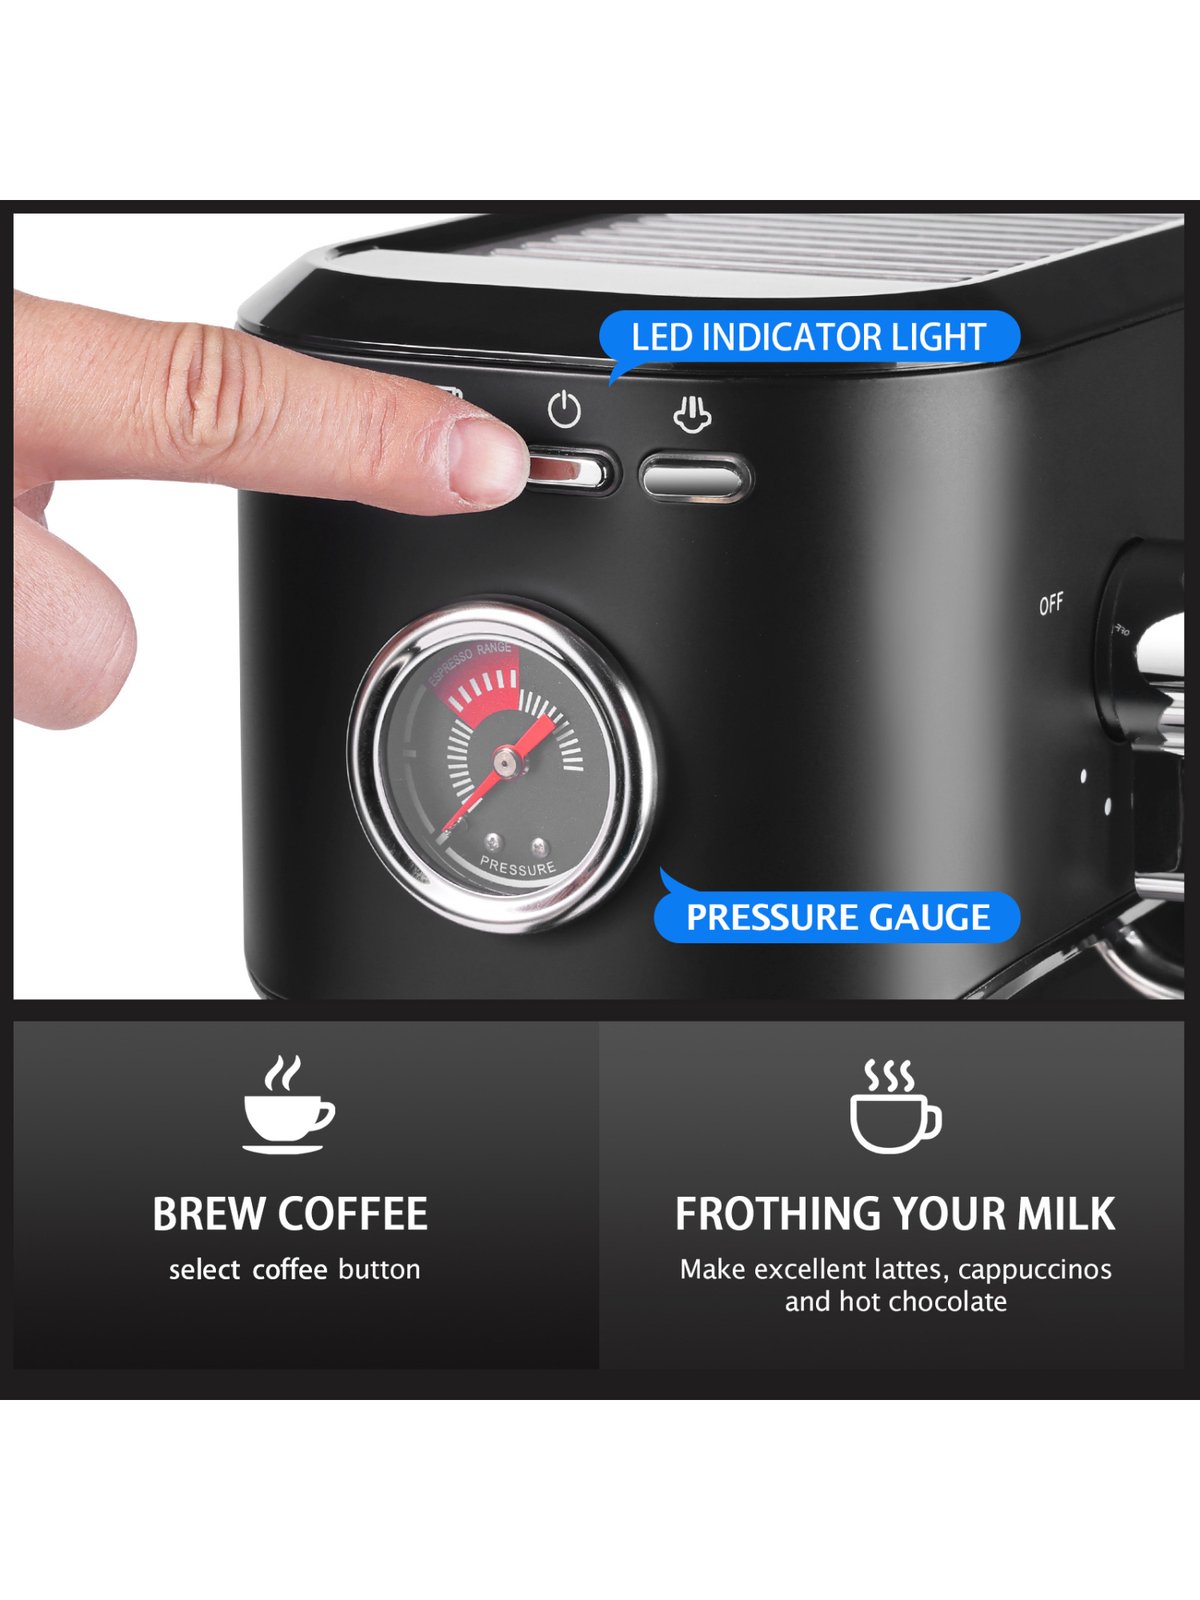 https://images.verishop.com/cyetus-black-espresso-machine-for-at-home-use-with-milk-steam-frother-wand-and-electric-coffee-bean-grinder-with-removable-stainless-steel-bowl/M00679283562651-751263690?auto=format&cs=strip&fit=max&w=1200